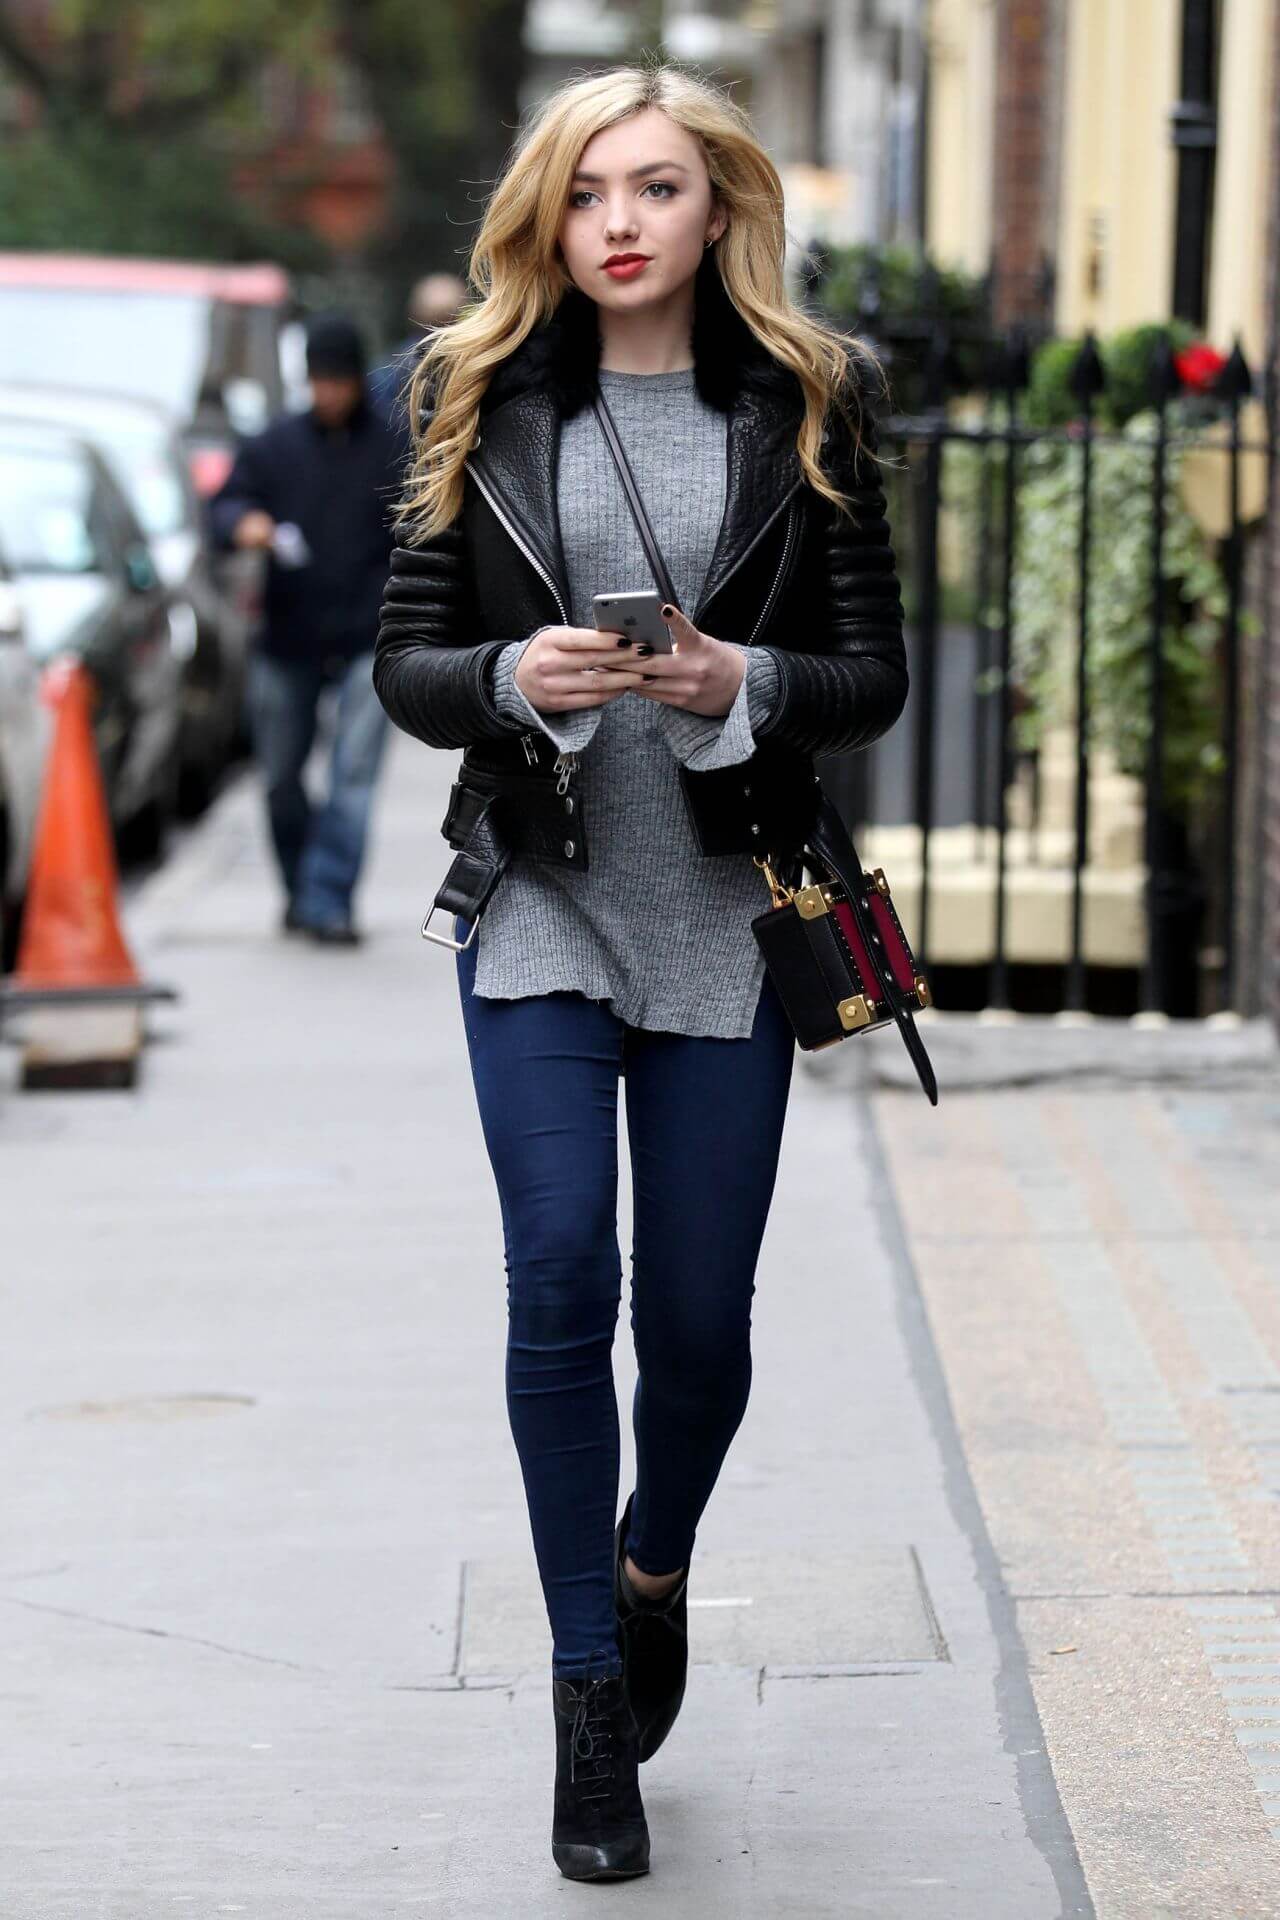 Peyton Slays The Casual Style In Skin-Tight Jeans, A Stylish Top, And A Black Leather Jacket